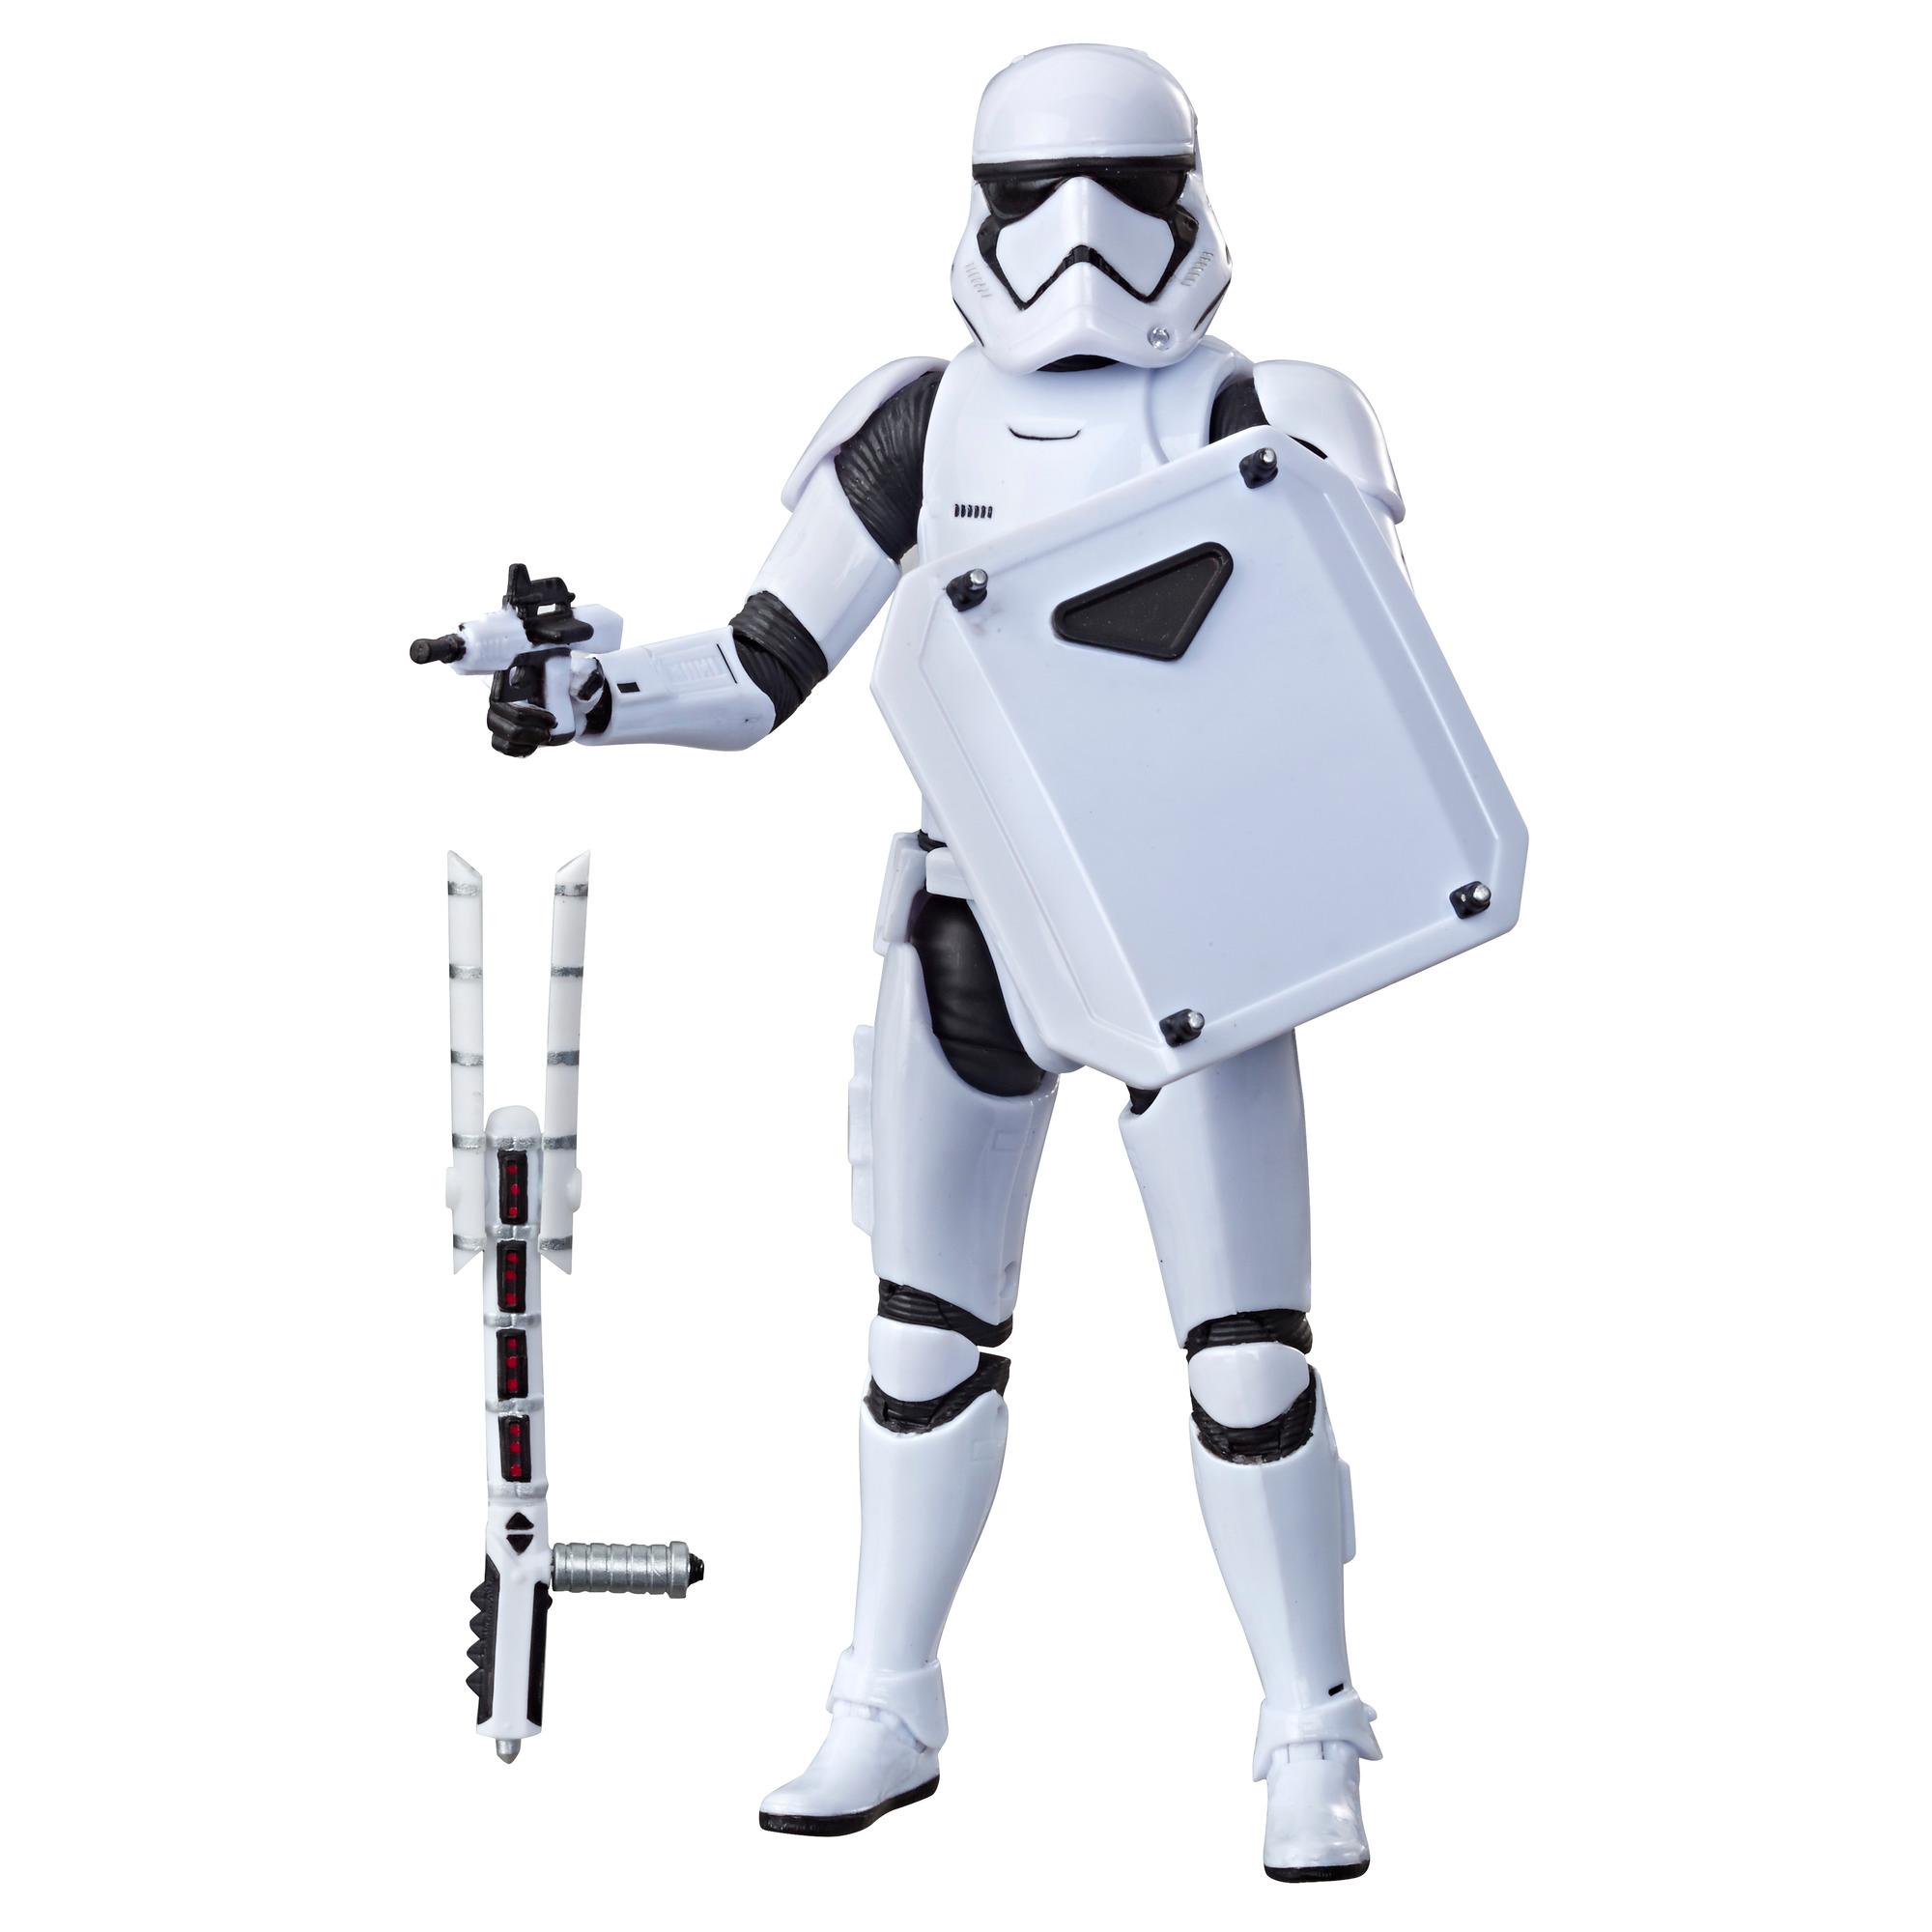 Star Wars The Black Series First Order Stormtrooper Toy 6-inch Scale Collectible Action Figure, Kids Ages 4 and Up